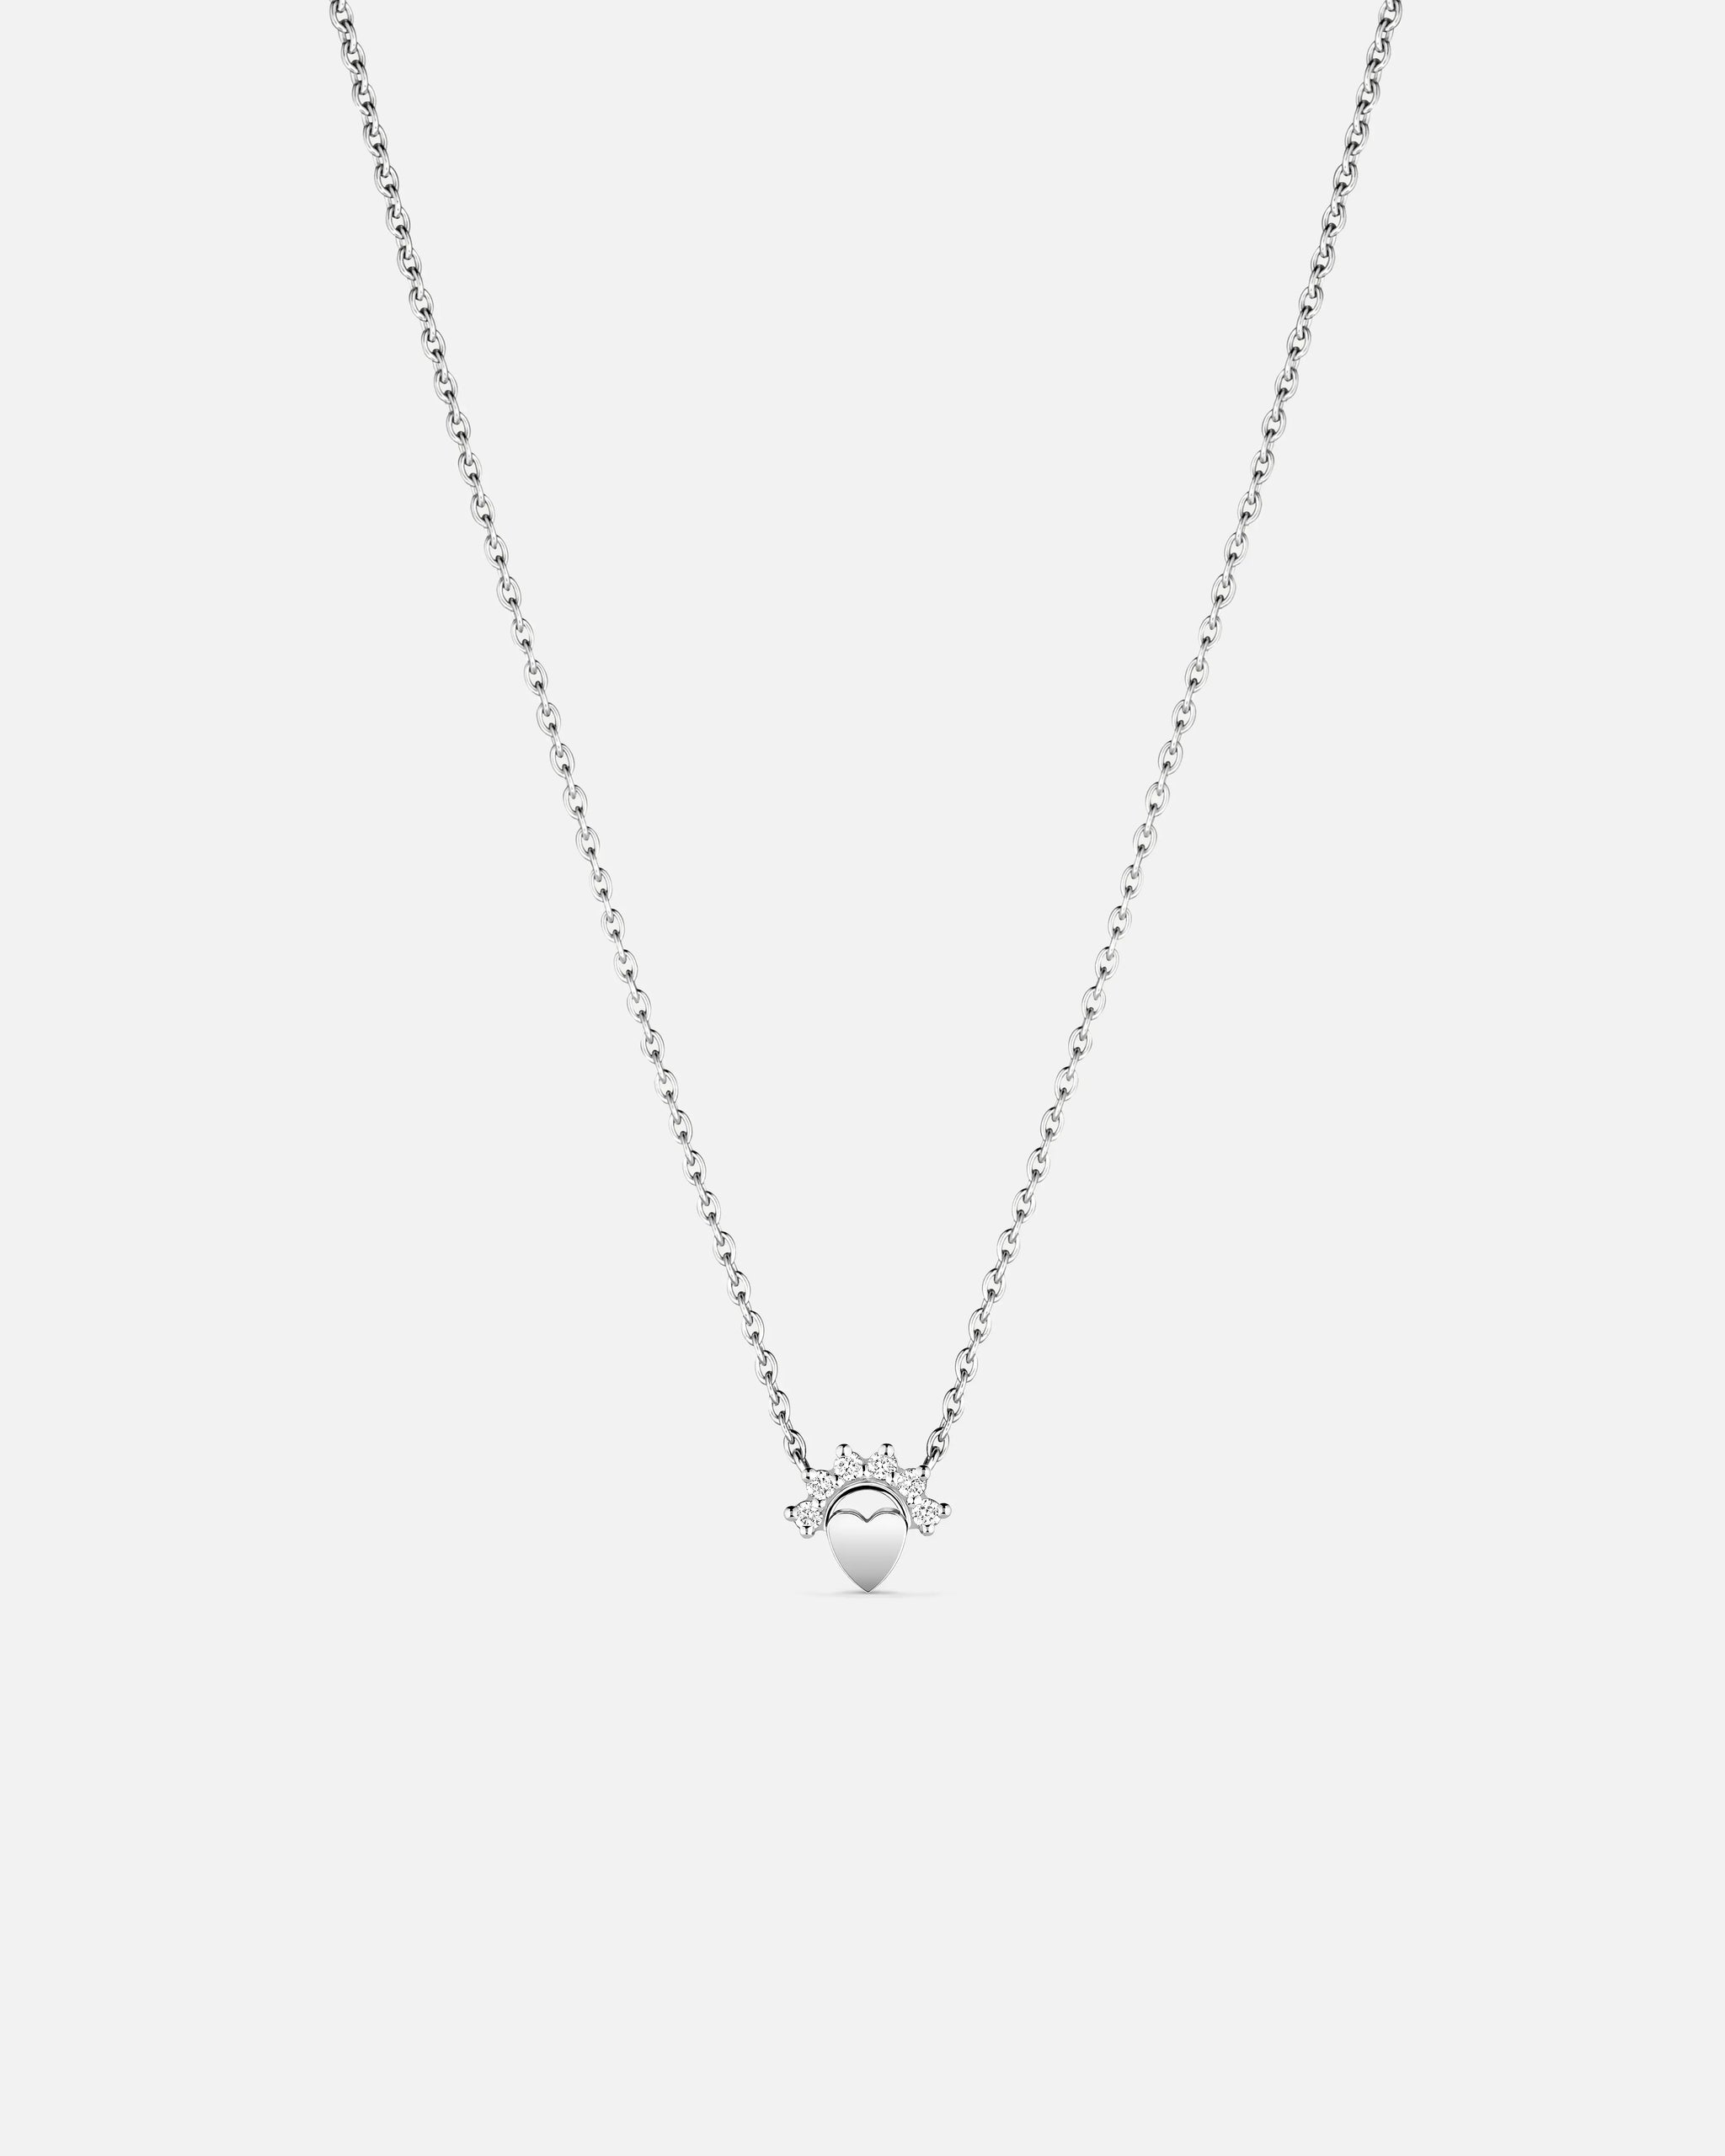 Small Love Pendant in White Gold - 1 - Nouvel Heritage